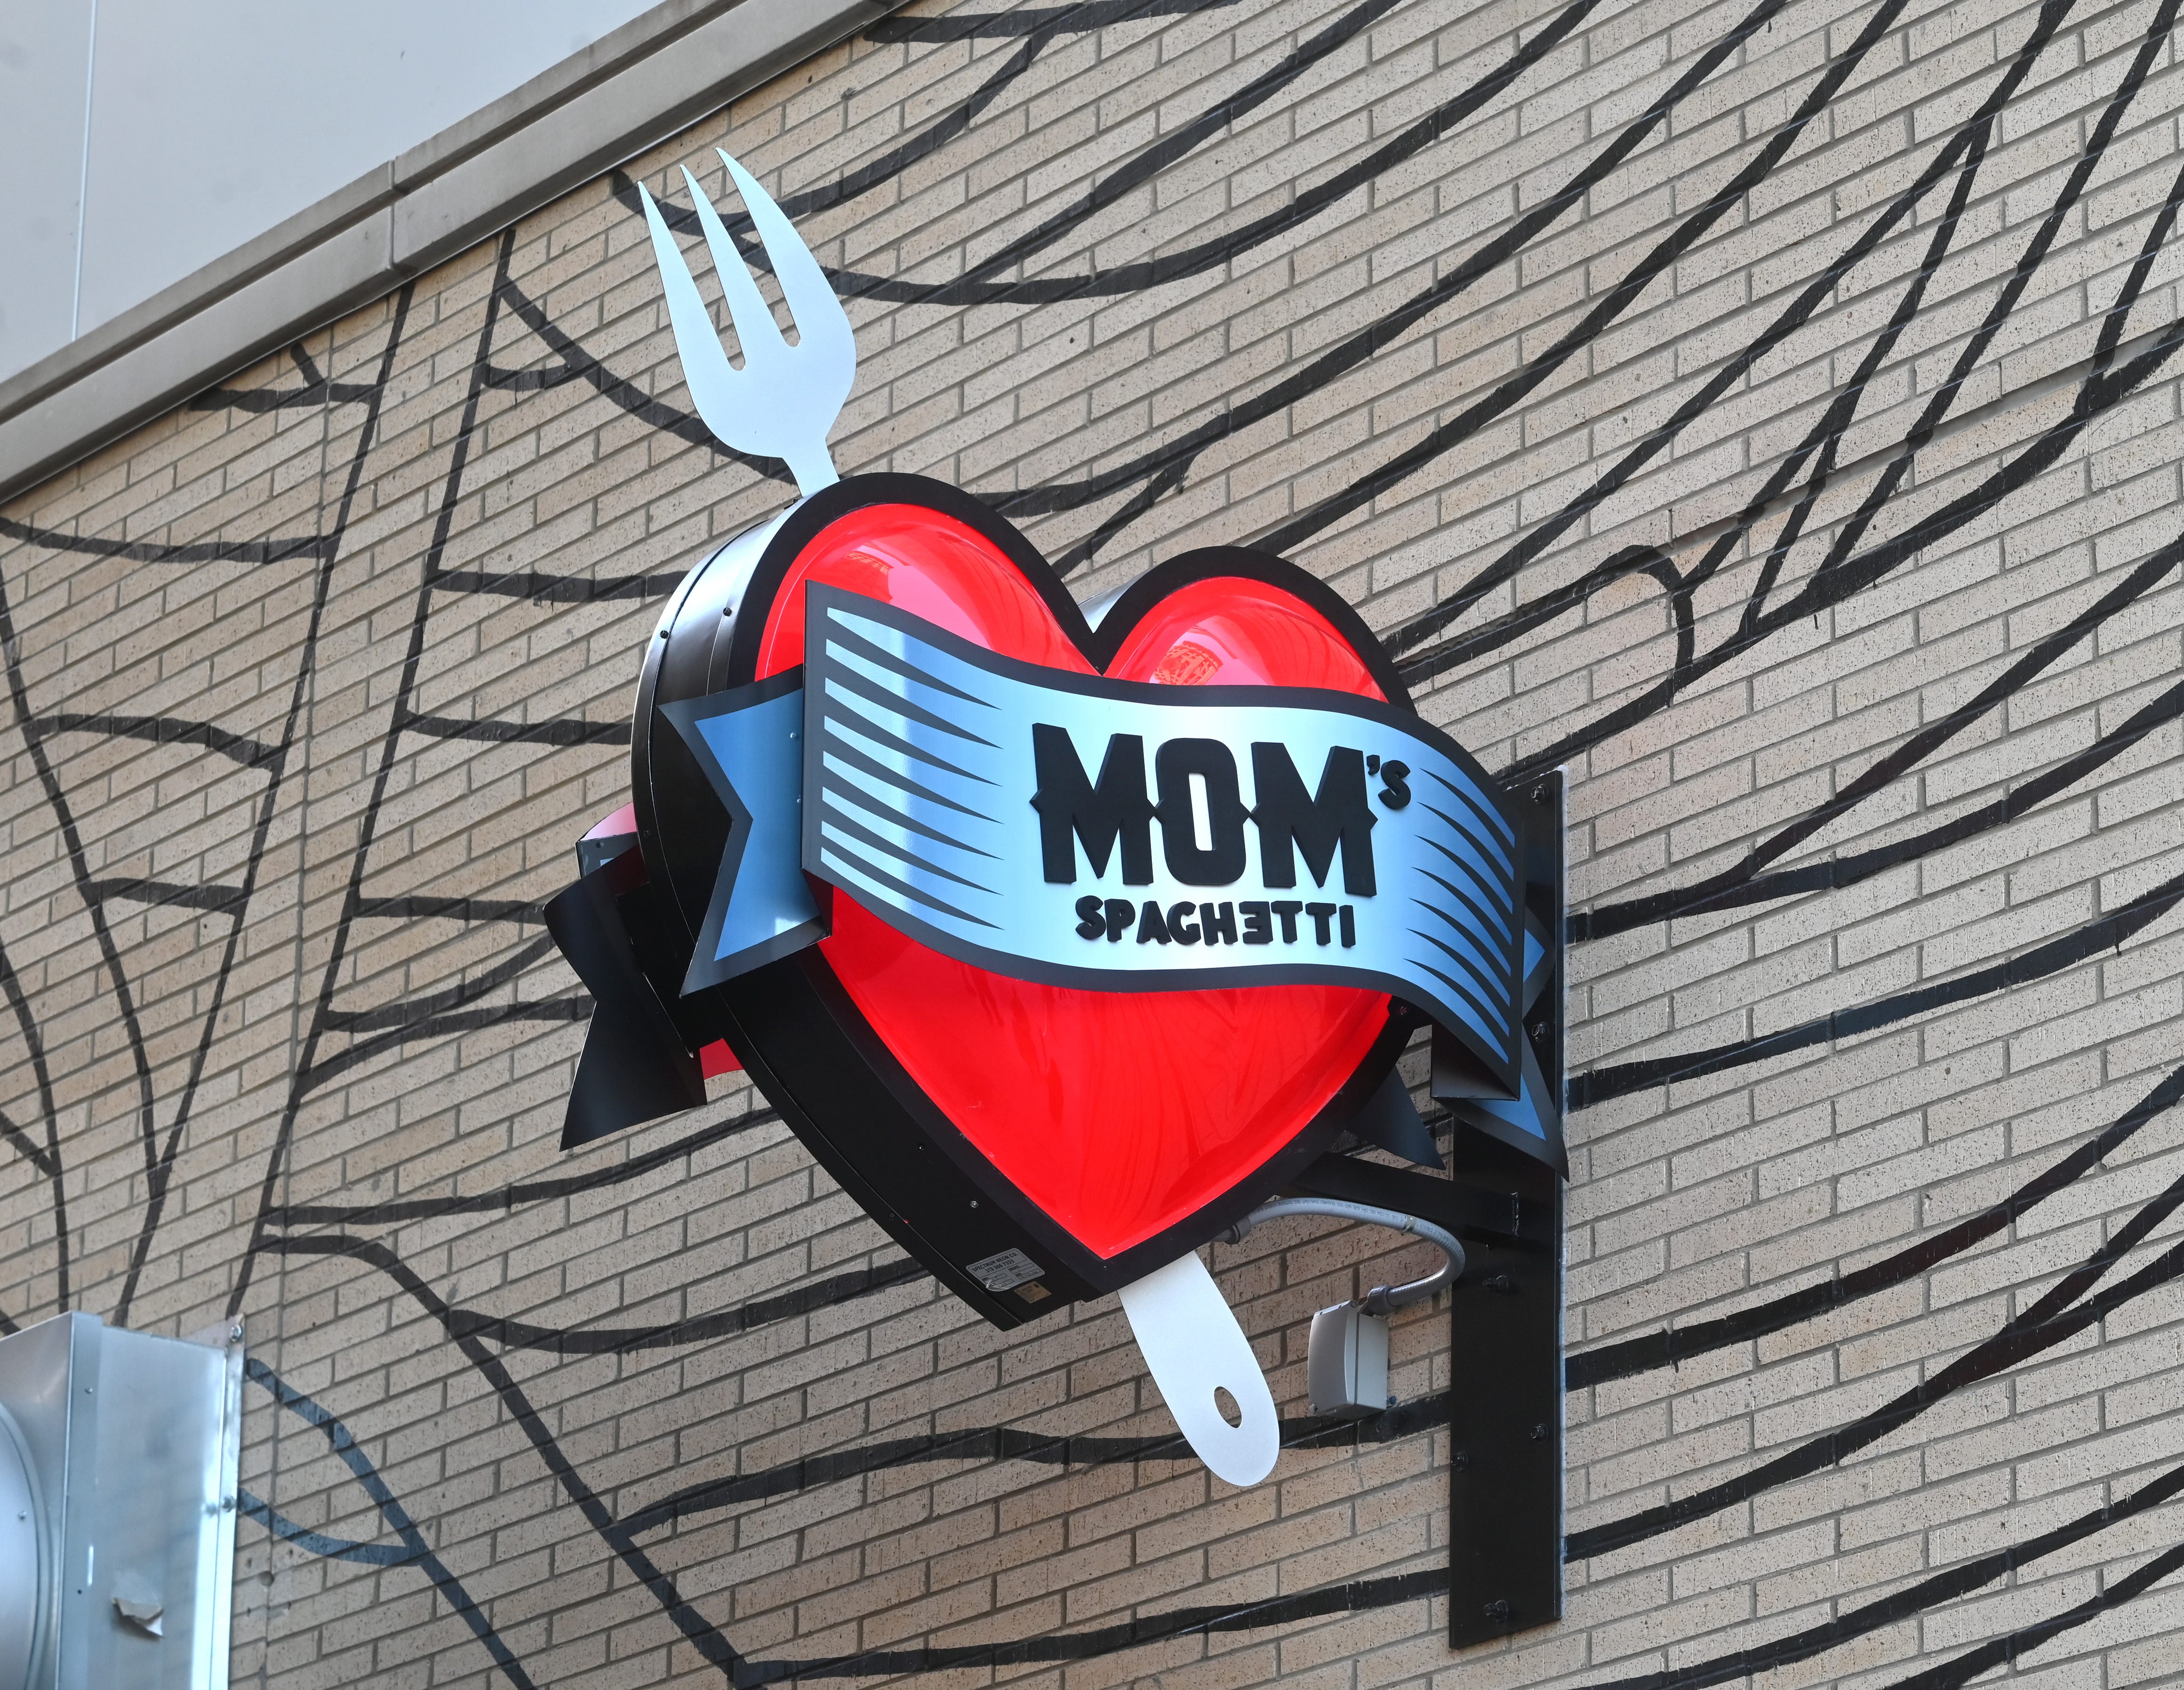 Signage for the newly opened Mom's Spaghetti on Wednesday, September 29, 2021.